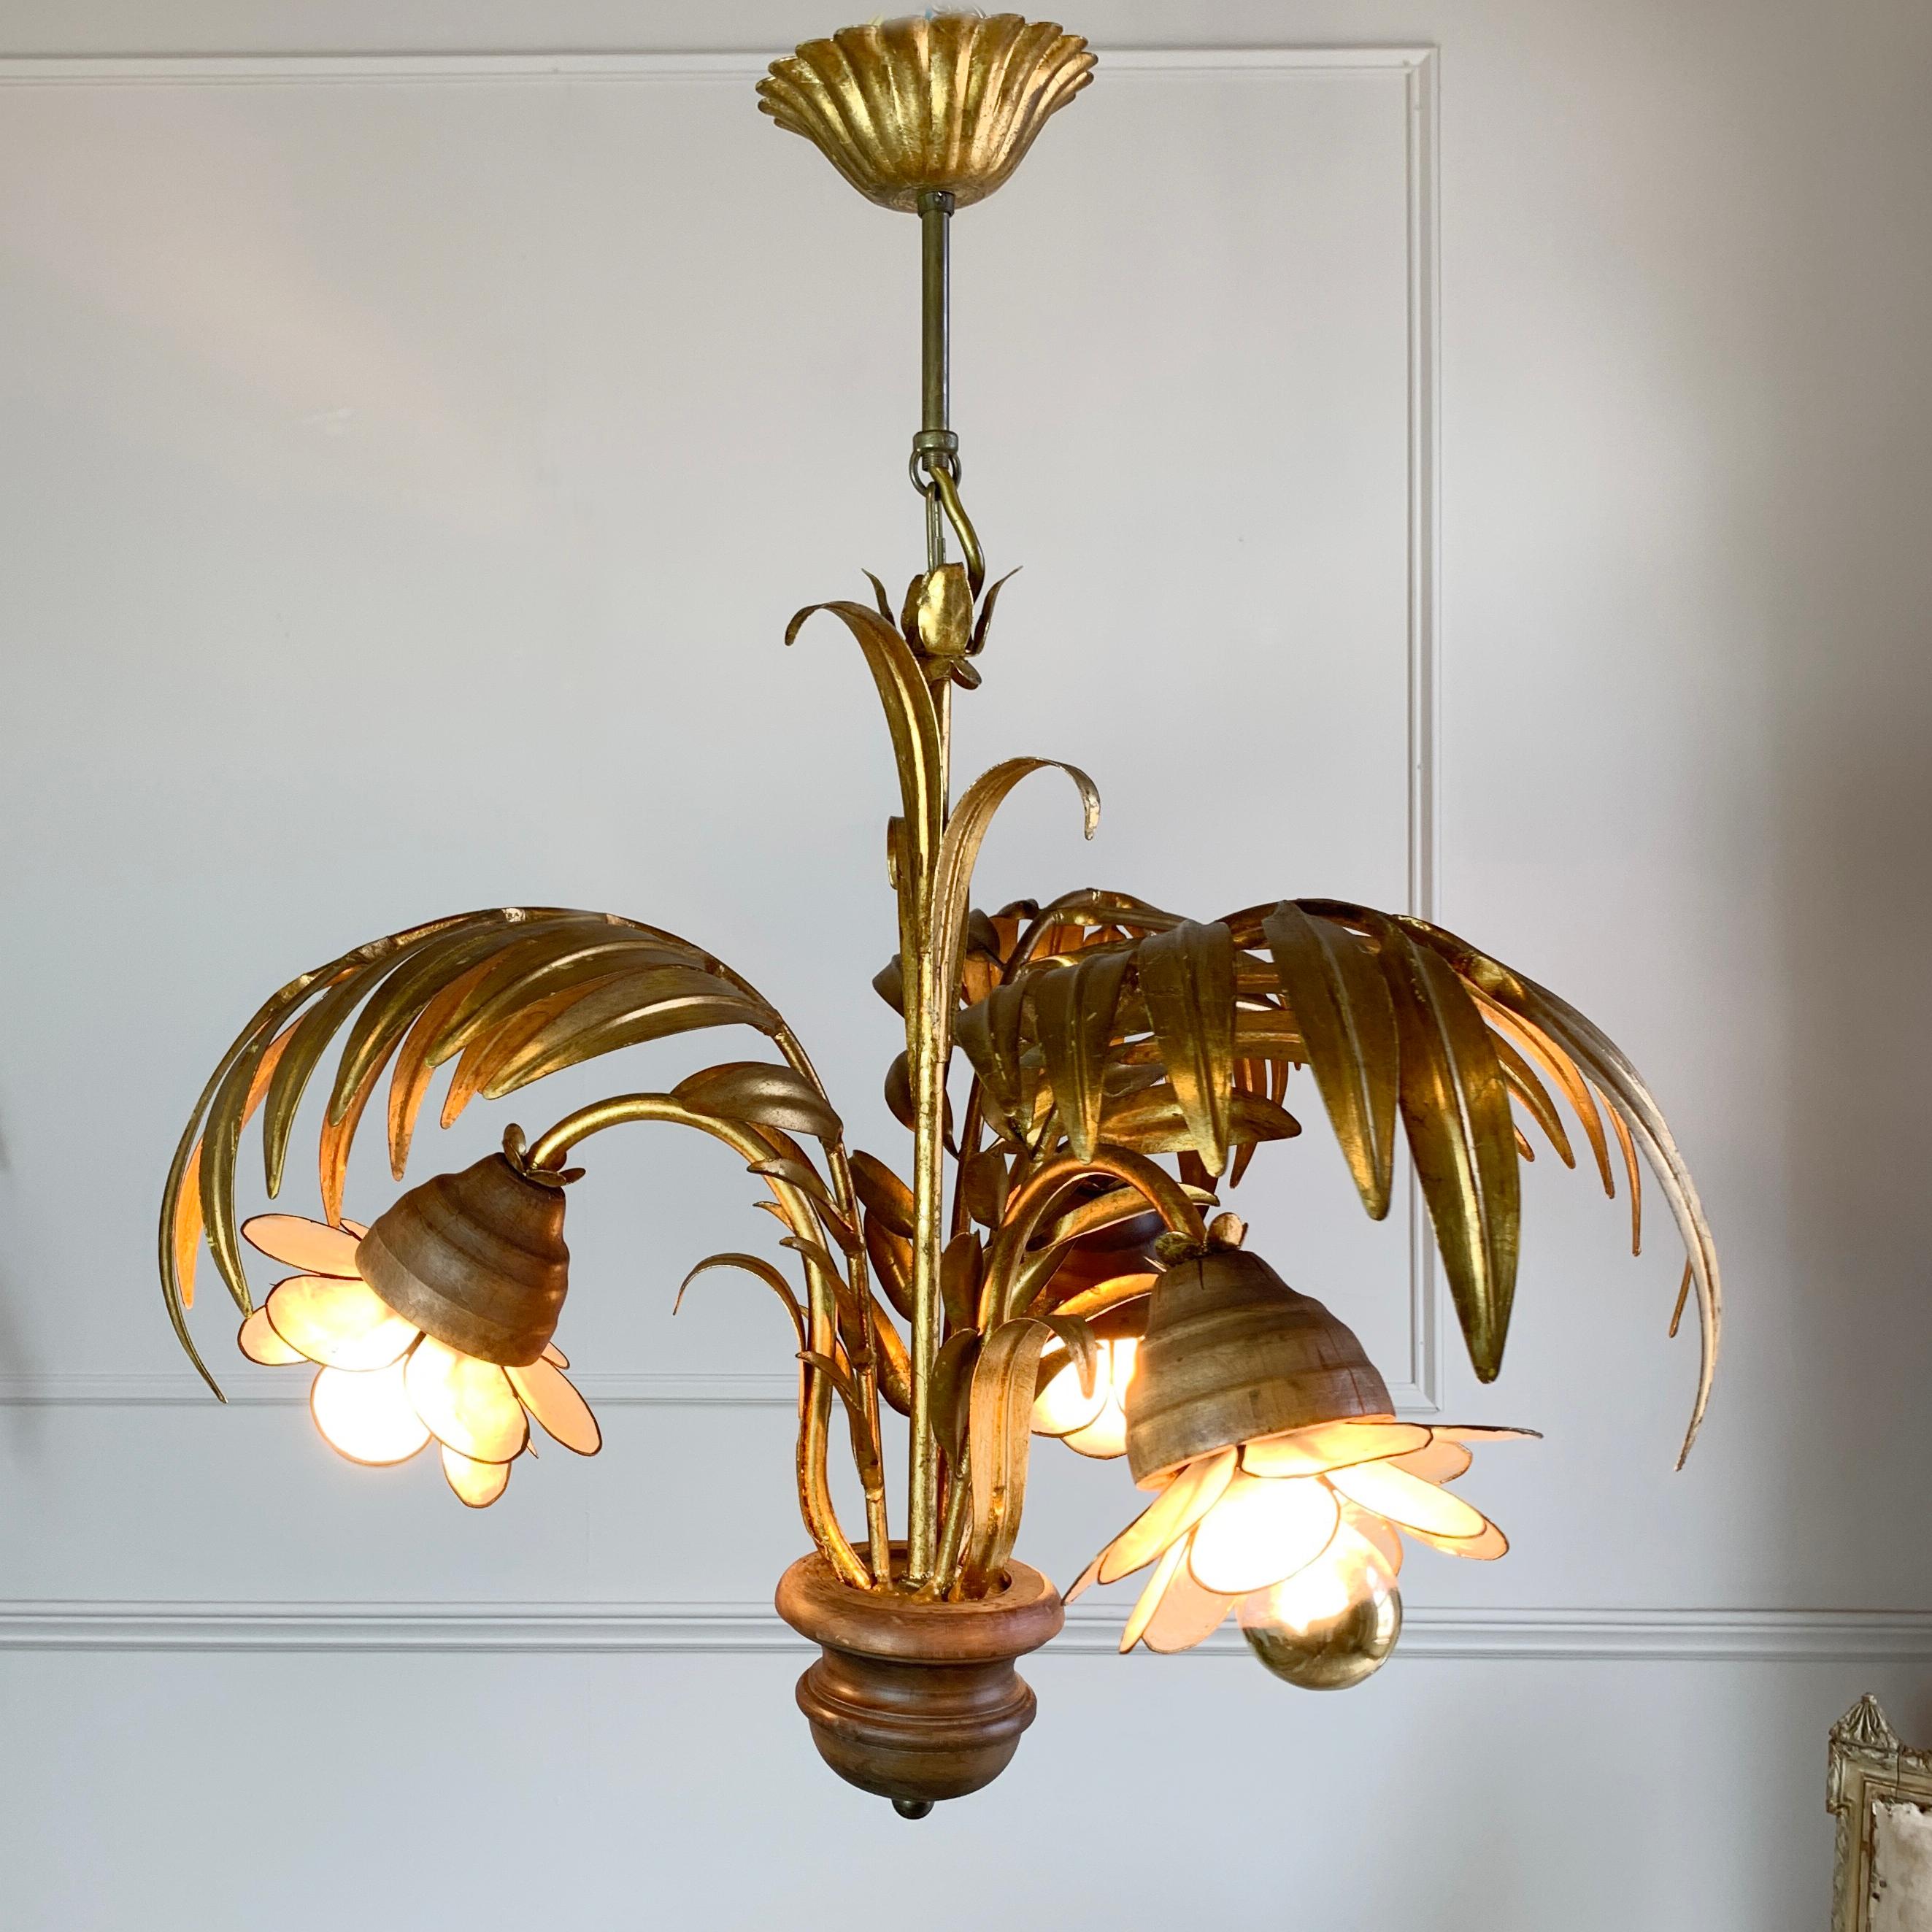 Spectacular Hans Kogl chandelier, gilt palm leaves form the canopy of the light, with turned wooden lamp holder cups and base, the Capiz shell shades contrast brilliantly against the wood and golden gilt metal body of the chandelier. Minor cracks to